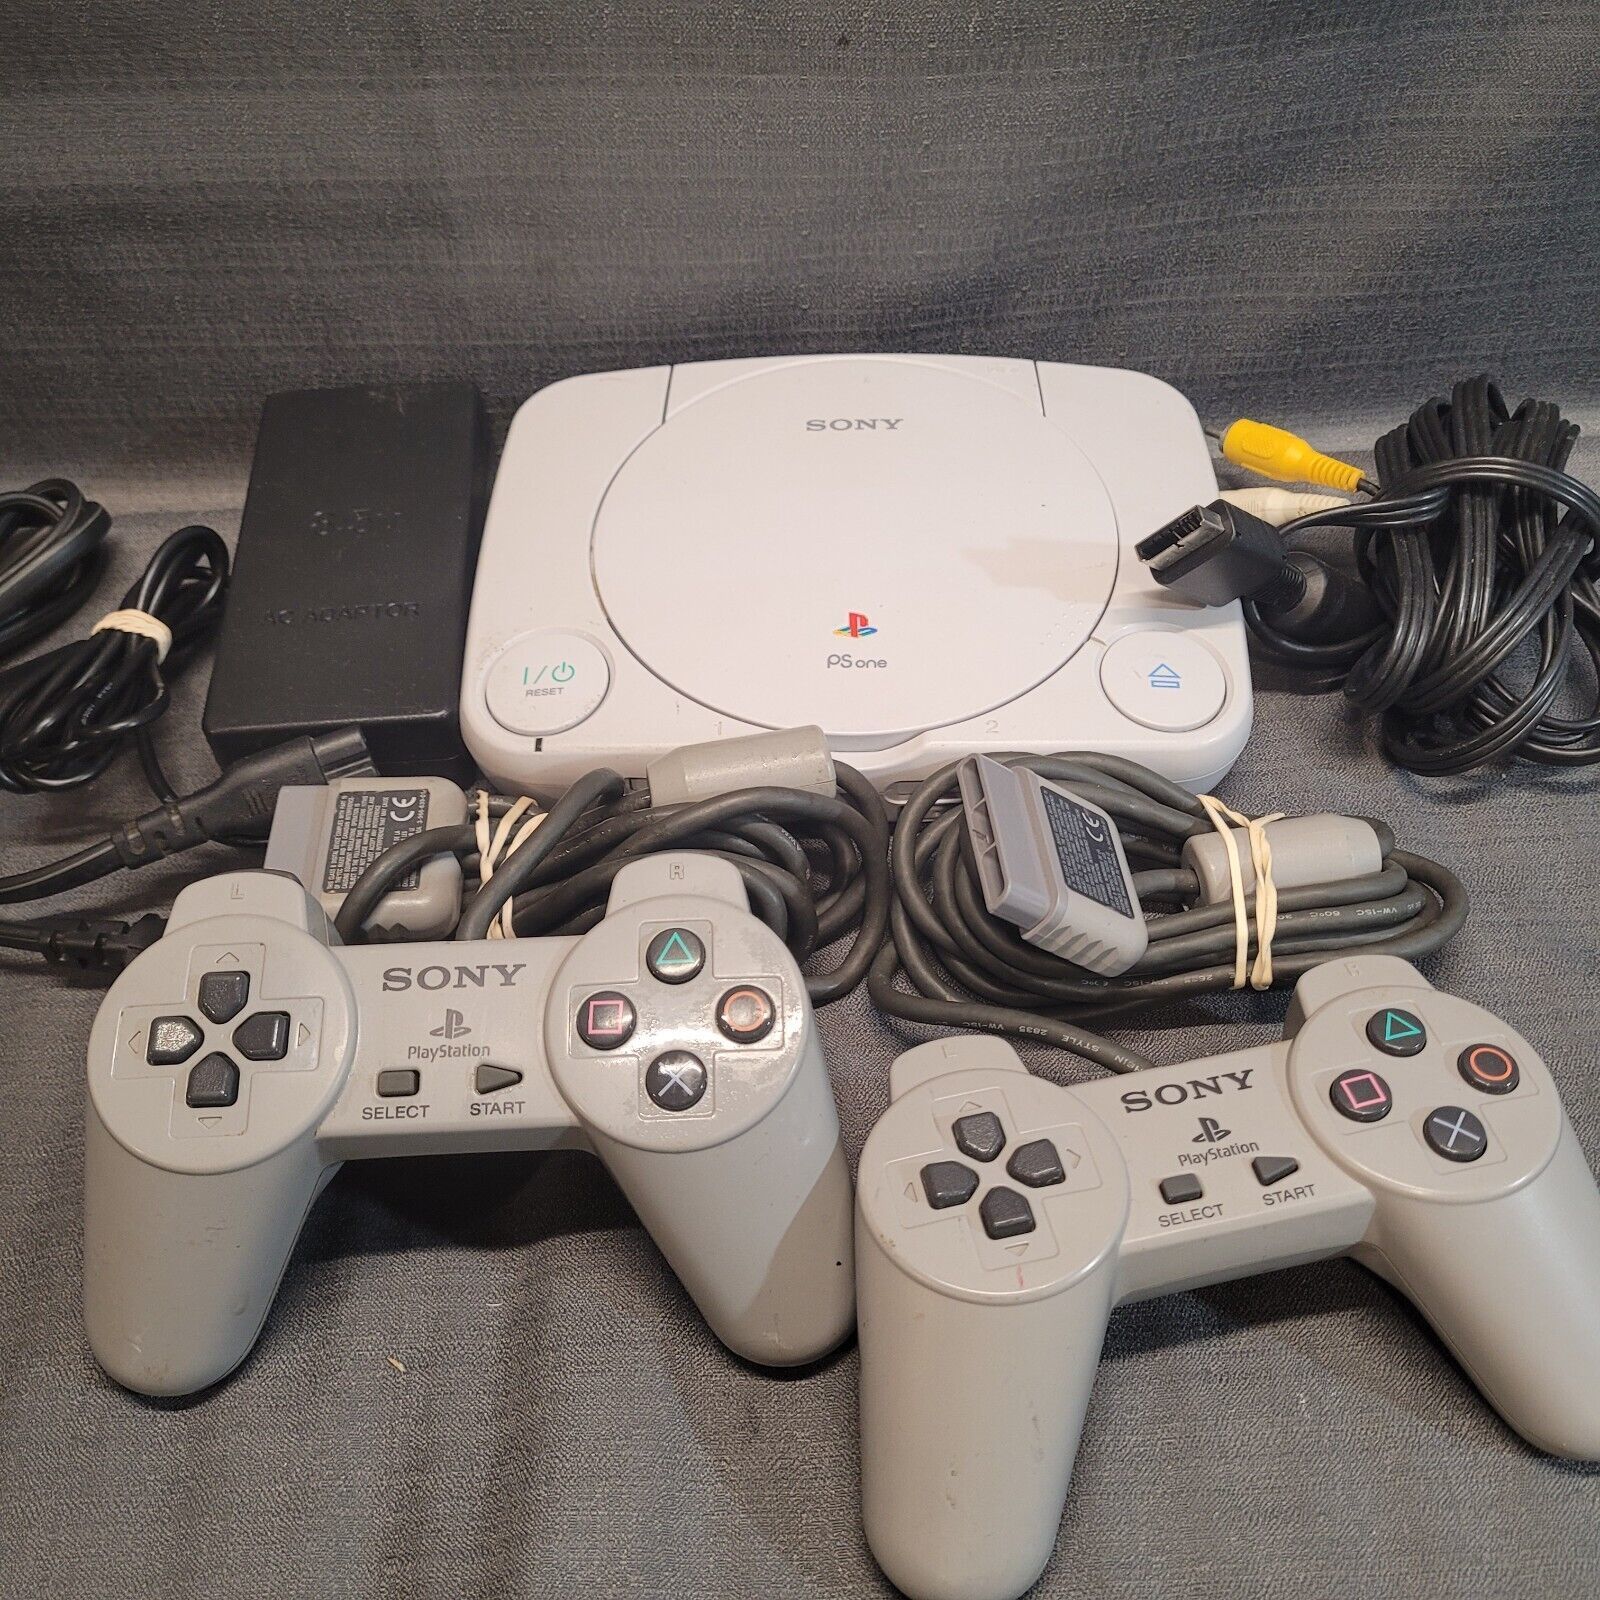 Primary image for Sony Playstation PS One Video Game Console - White